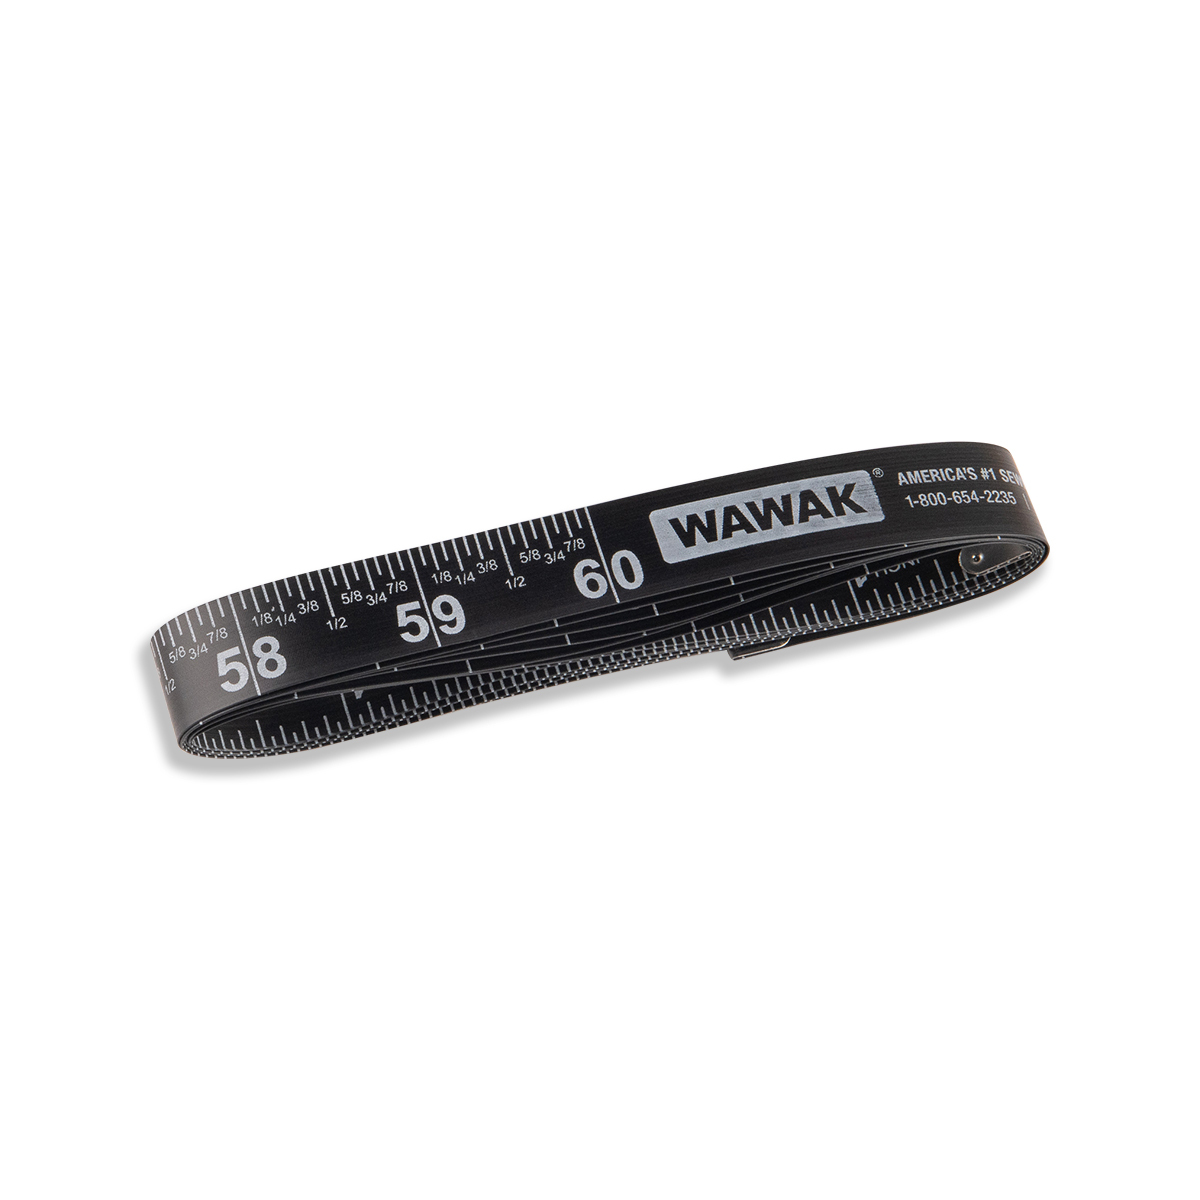 Retractable Tape Measure (60 inches), Dritz #D943 : Sewing Parts